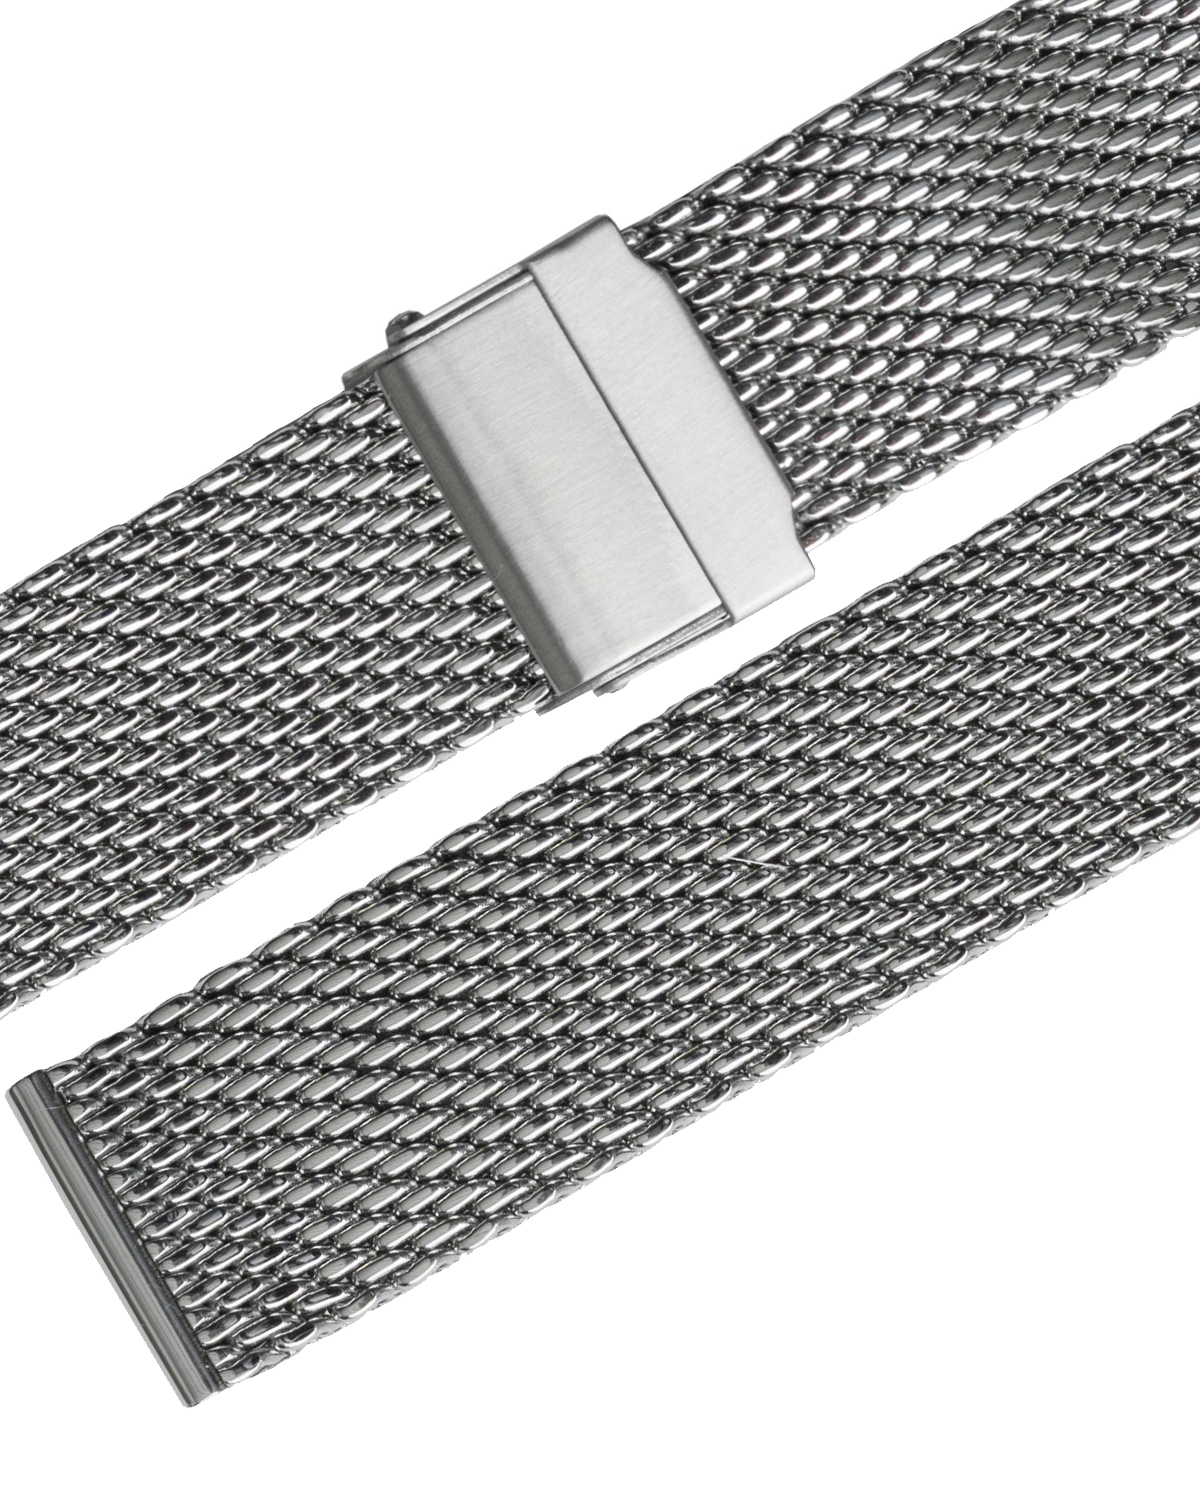 70-78065 Stalux Milanaise mesh 18mm stainless steel